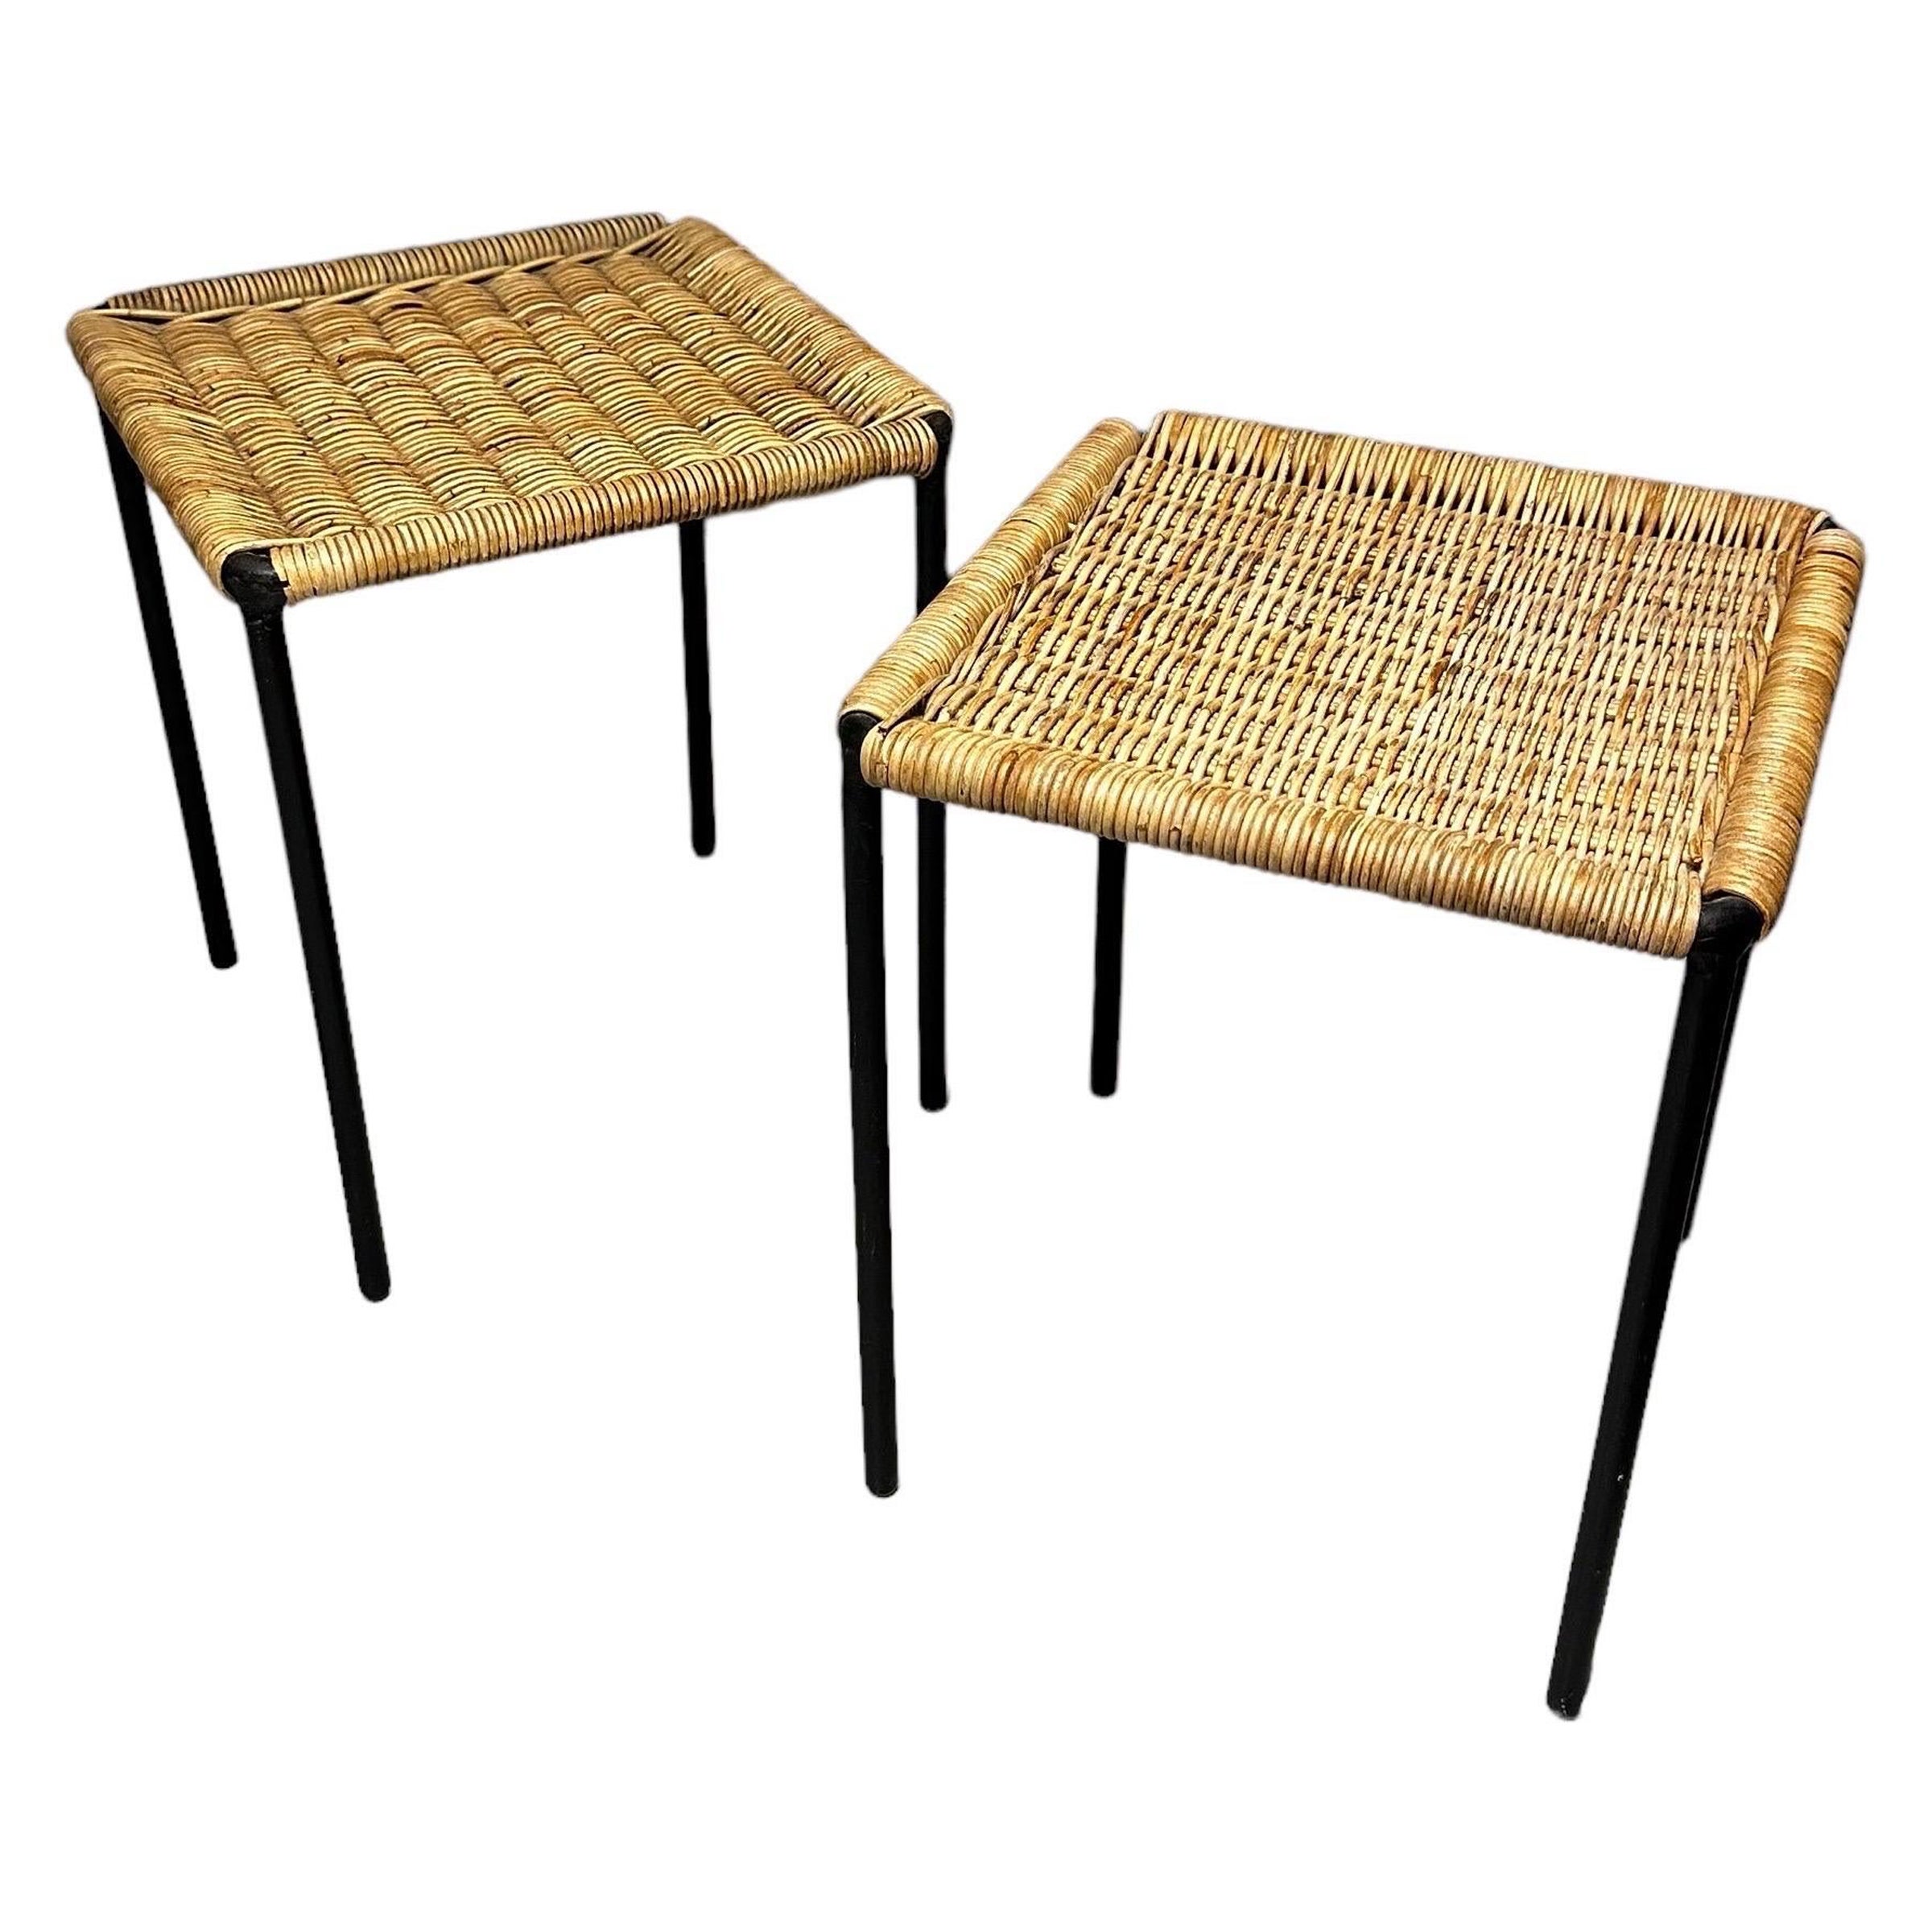 Carl Auböck Side Tables with Black Iron and Rattan, Set of Two, Austria 1950s For Sale